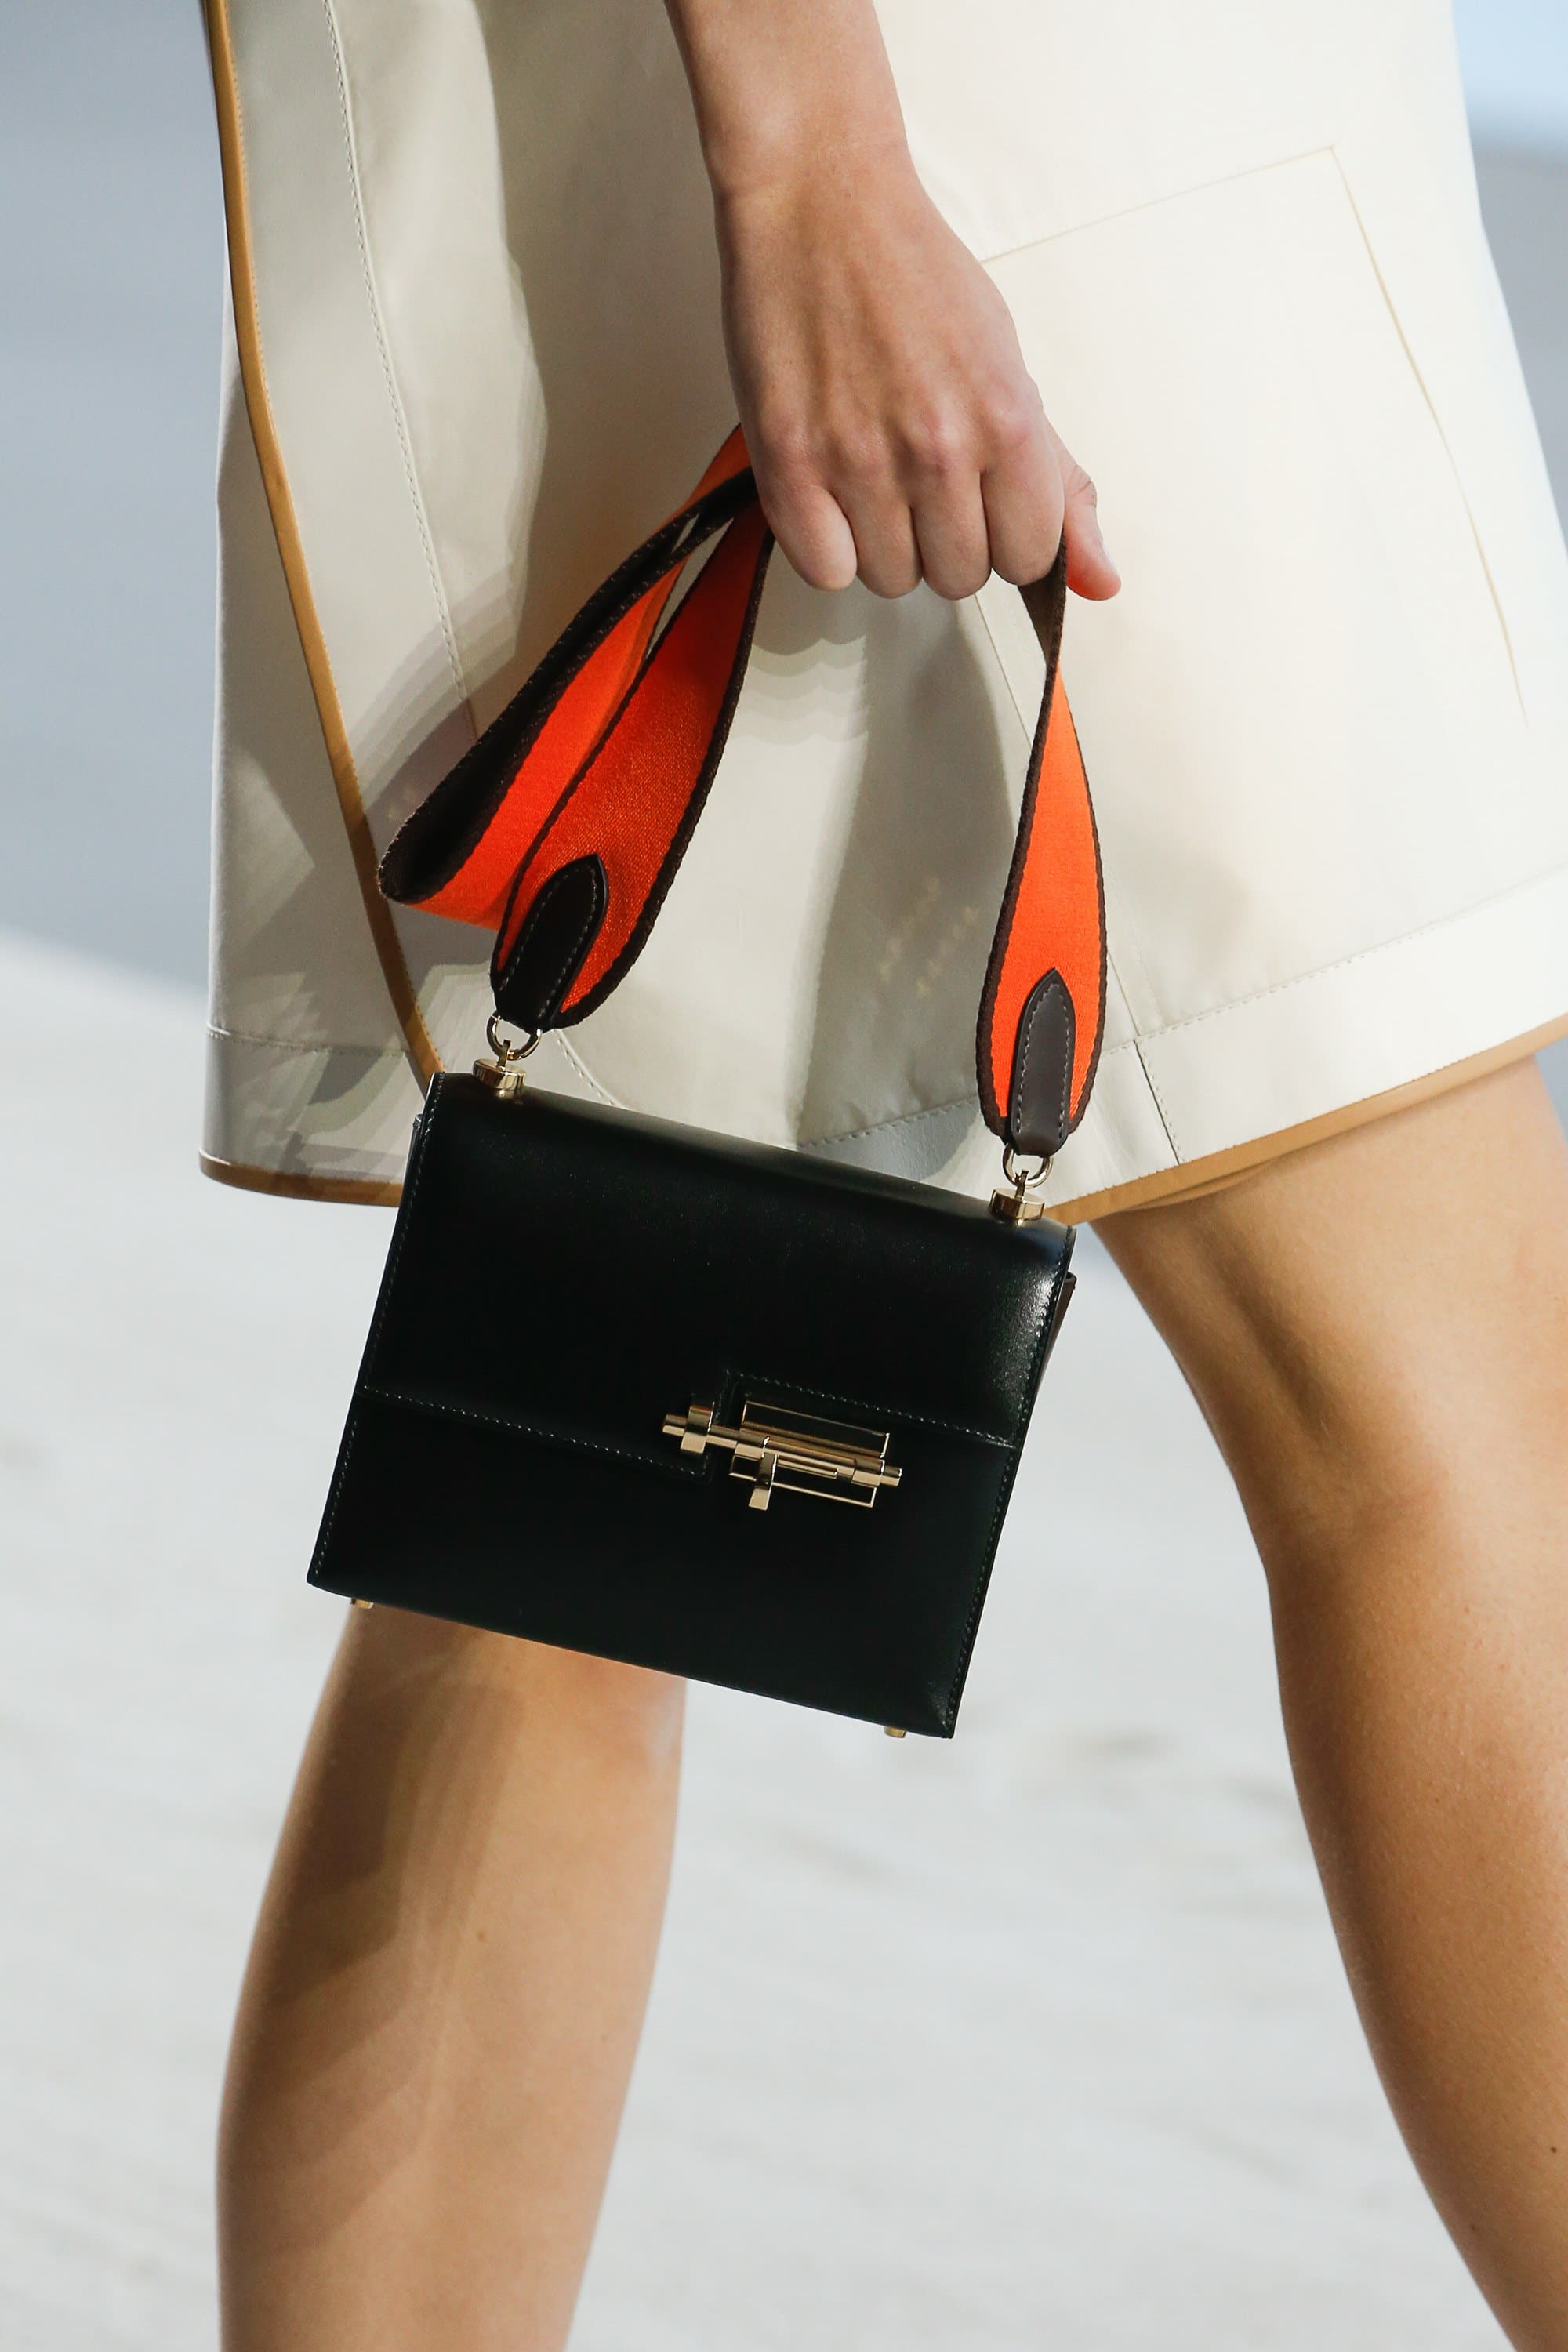 Hermes Spring/Summer 2019 Runway Bag Collection | Spotted Fashion